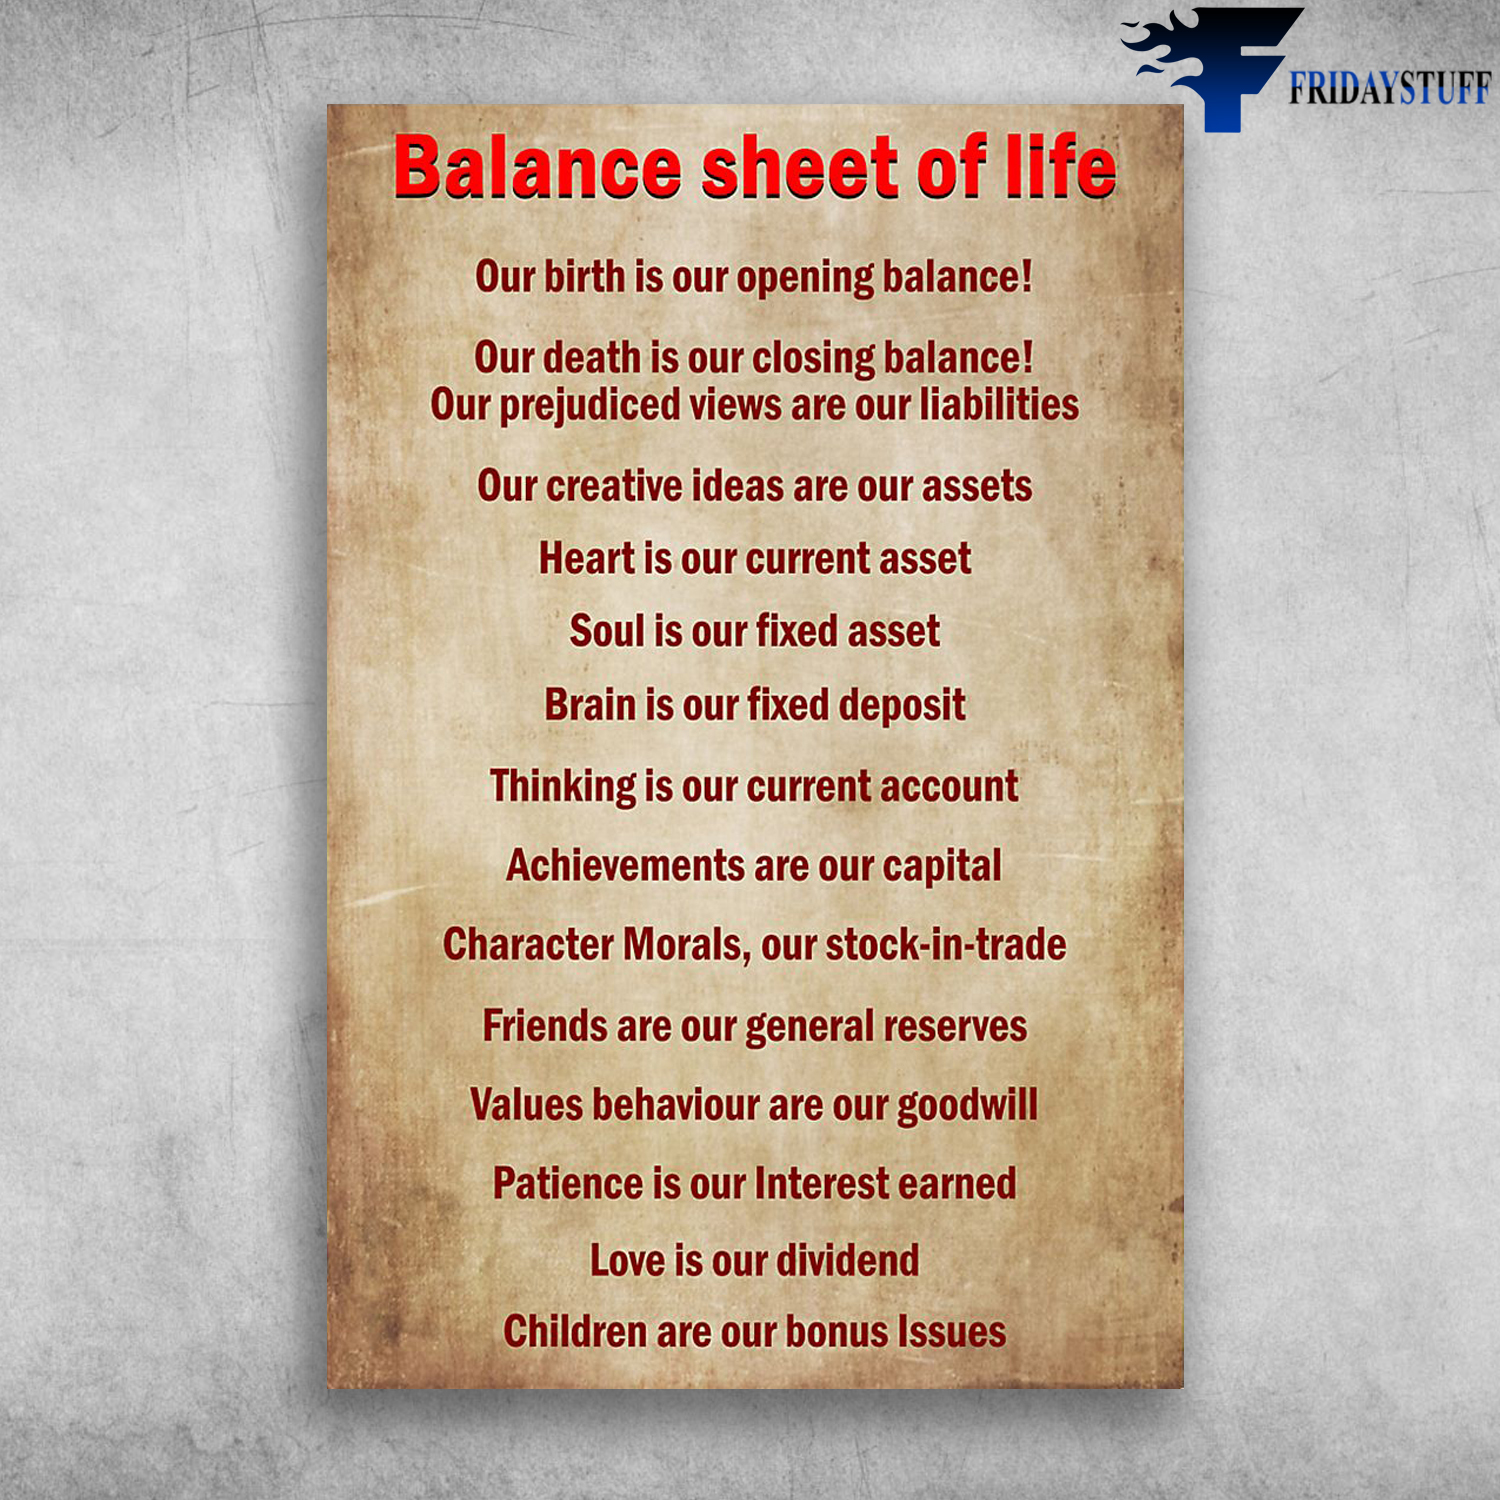 Balance Sheet of Life - Our Birth In Our Opening Balance!